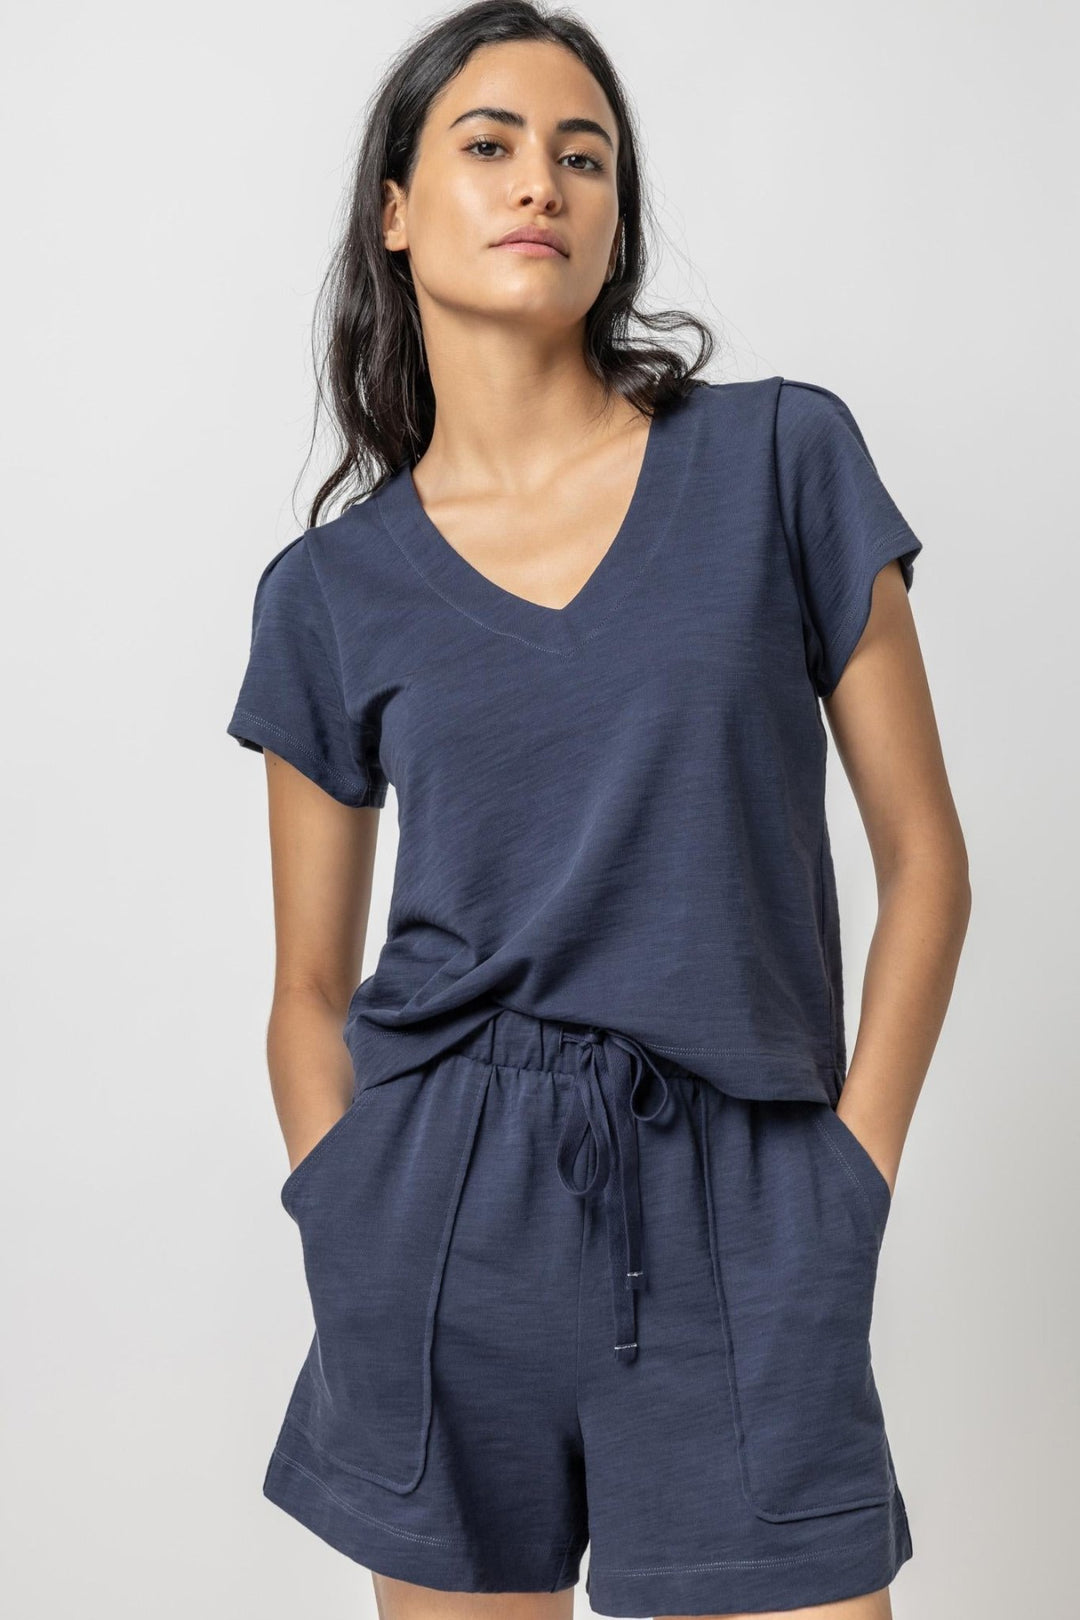 Lilla P - Pleated Cap Sleeve V-Neck: Navy - Shorely Chic Boutique